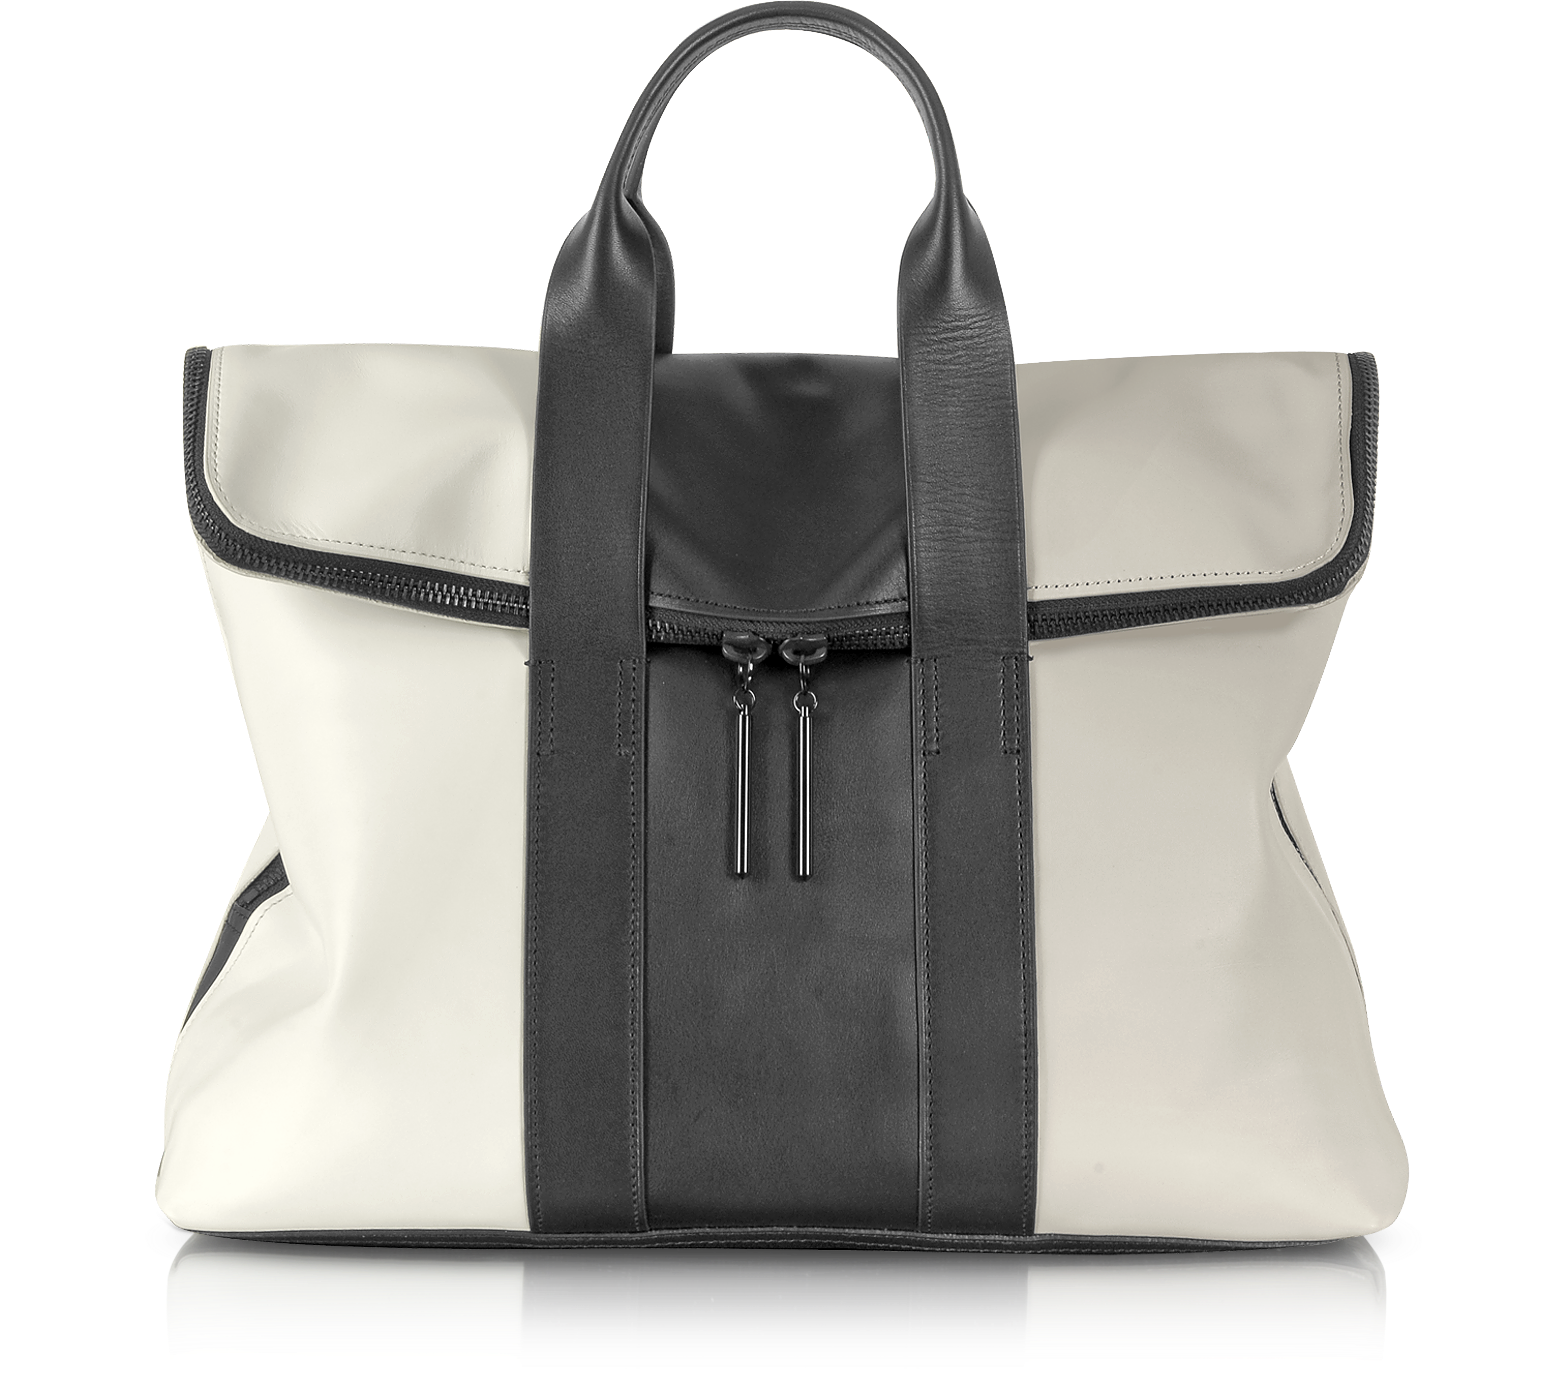 3.1 Phillip Lim Tricolor Leather 31 Hours Bag at FORZIERI